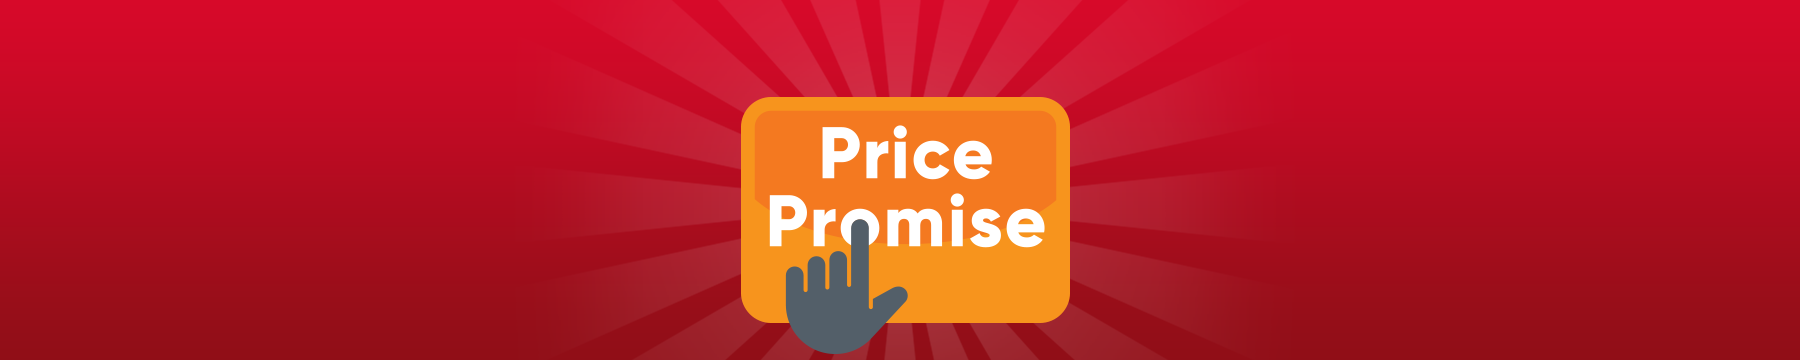 Price promise banner